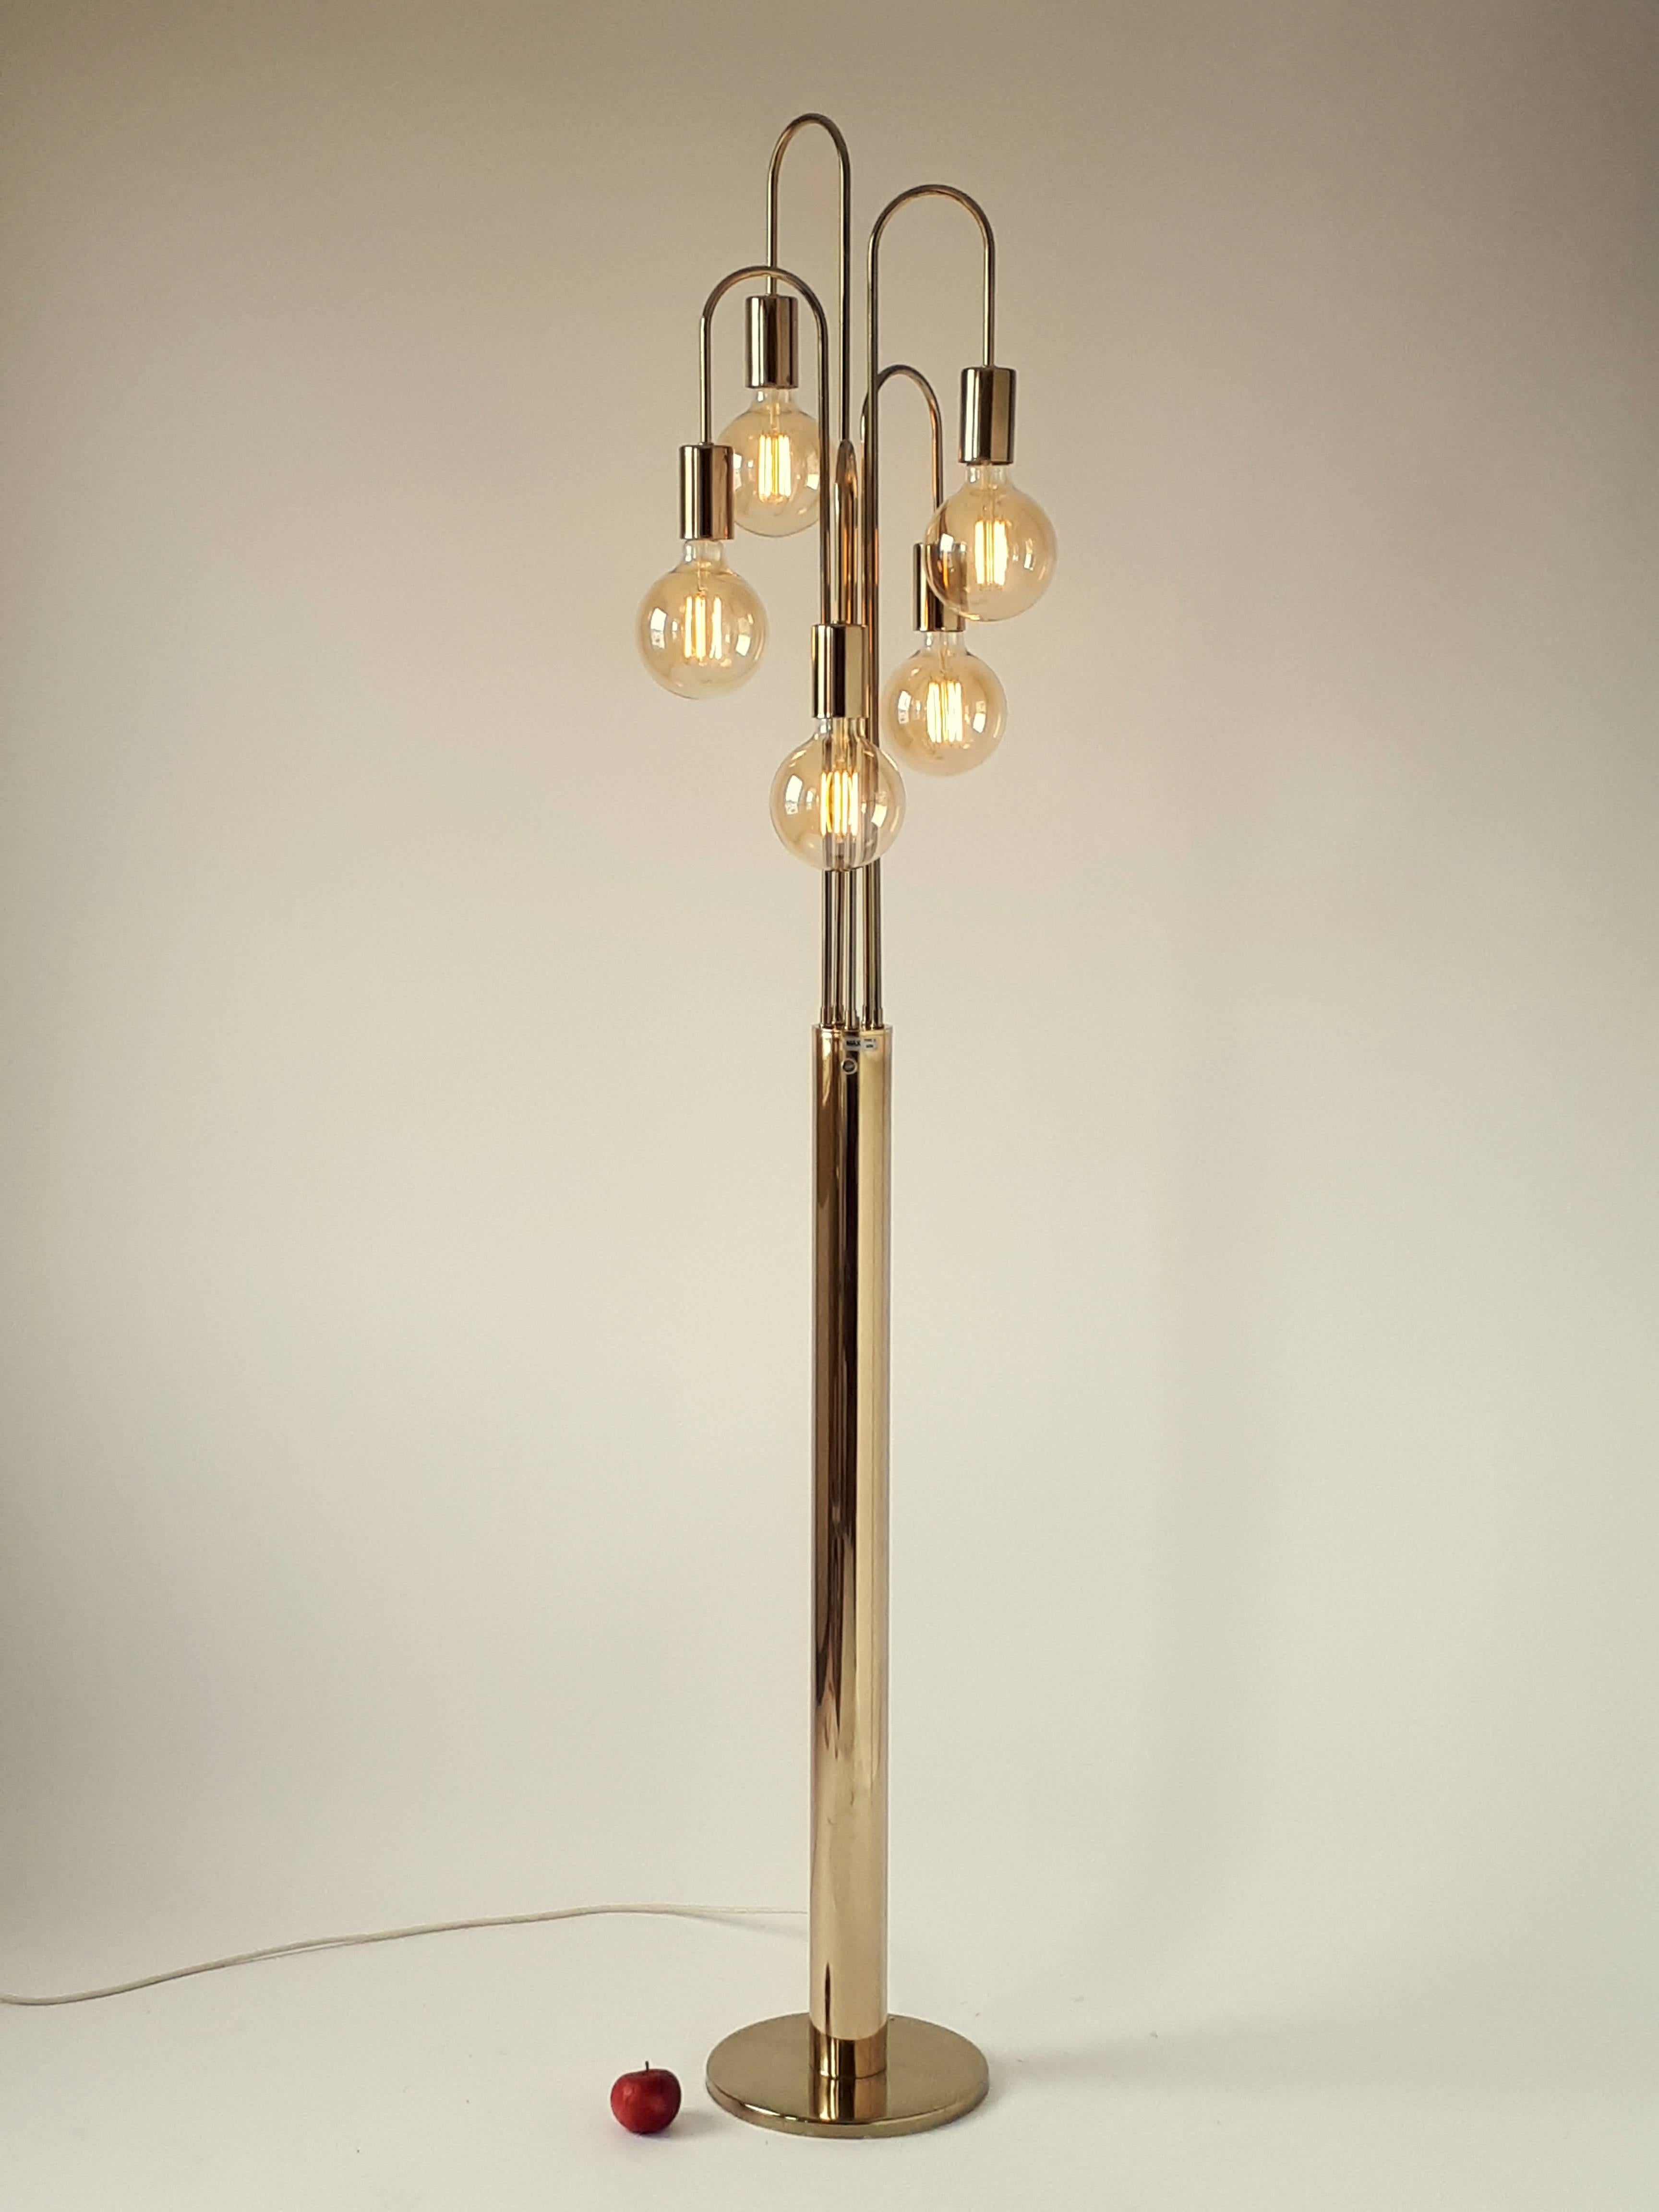 Extra tall floor lamp measuring 74 inches high. 

Five regular E26 size socket rated at 60 watts each. 

G40 Vintage lightbulb not supplied with order. 

Switch on base.